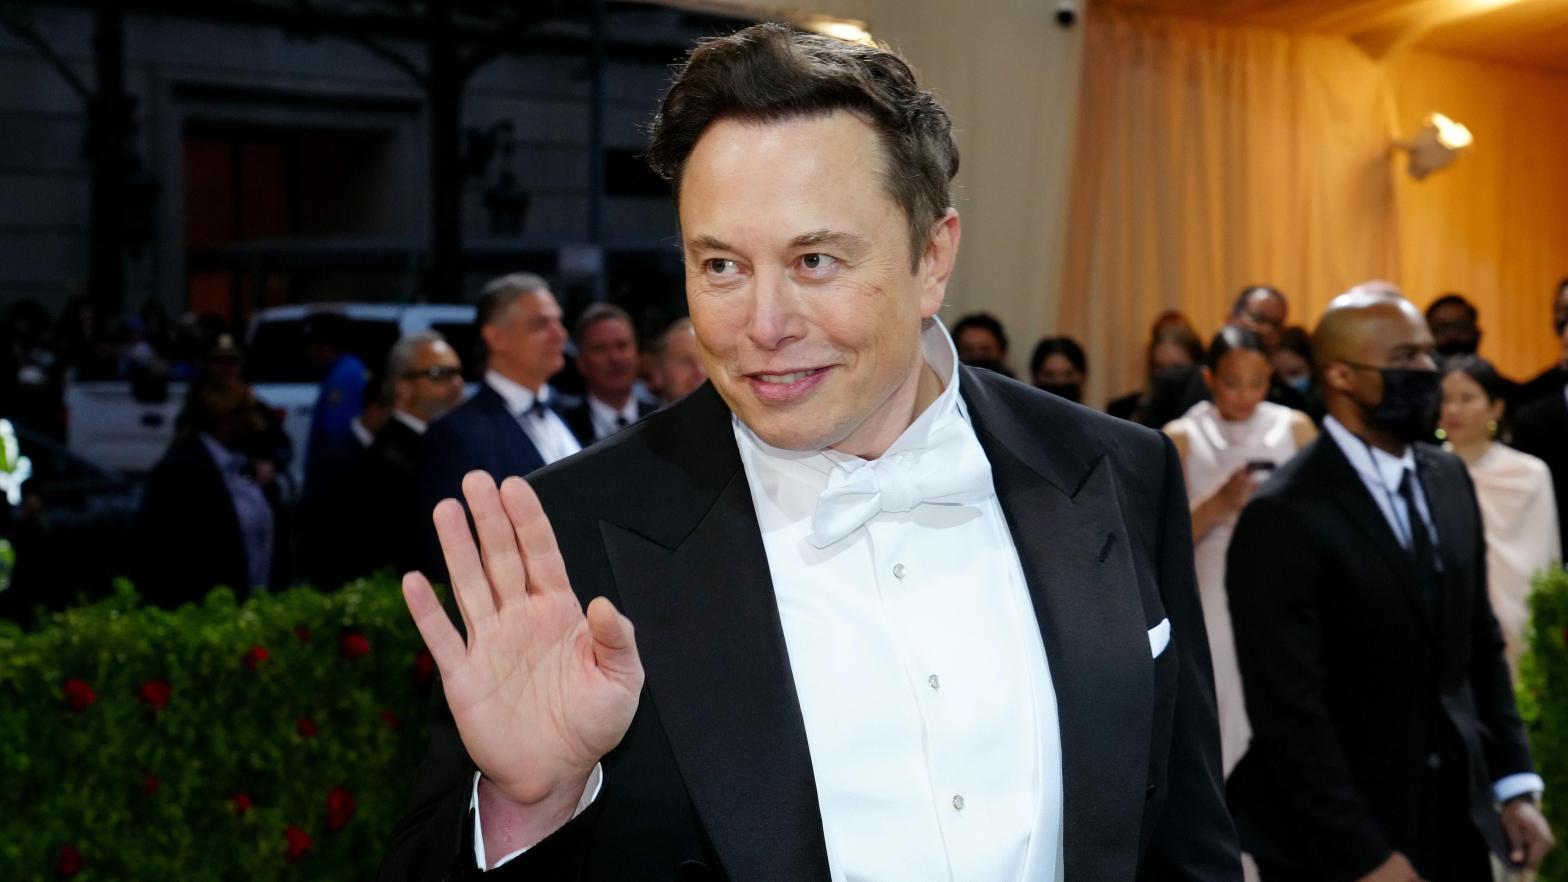 Elon Musk attends The 2022 Met Gala at The Metropolitan Museum of Art on May 2, 2022  in New York City. (Photo: Jeff Kravitz/FilmMagic, Getty Images)